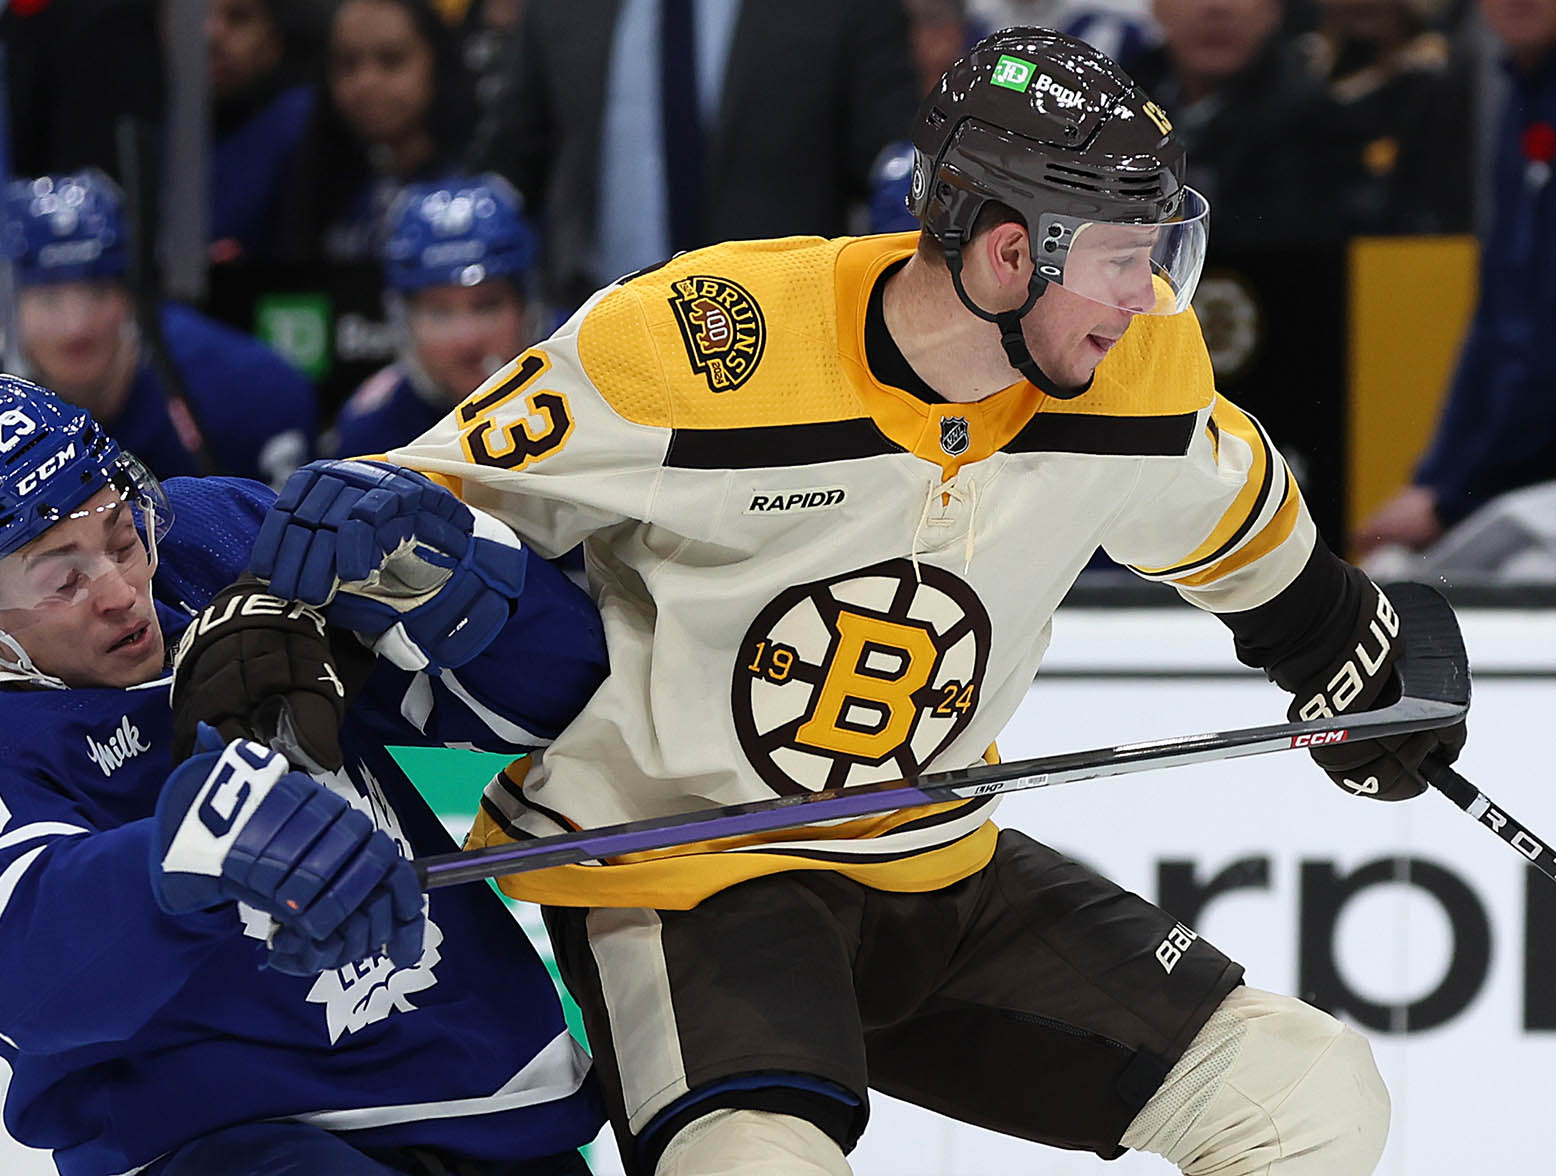 BOSTON, MASSACHUSETTS - NOVEMBER 02: Pontus Holmberg #29 of the Toronto Maple Leafs collides with Charlie Coyle #13 of the Boston Bruins during the third period at TD Garden on November 02, 2023 in Boston, Massachusetts. The Bruins defeat the Maple Leafs 3-2 in overtime. (Photo by Maddie Meyer/Getty Images)